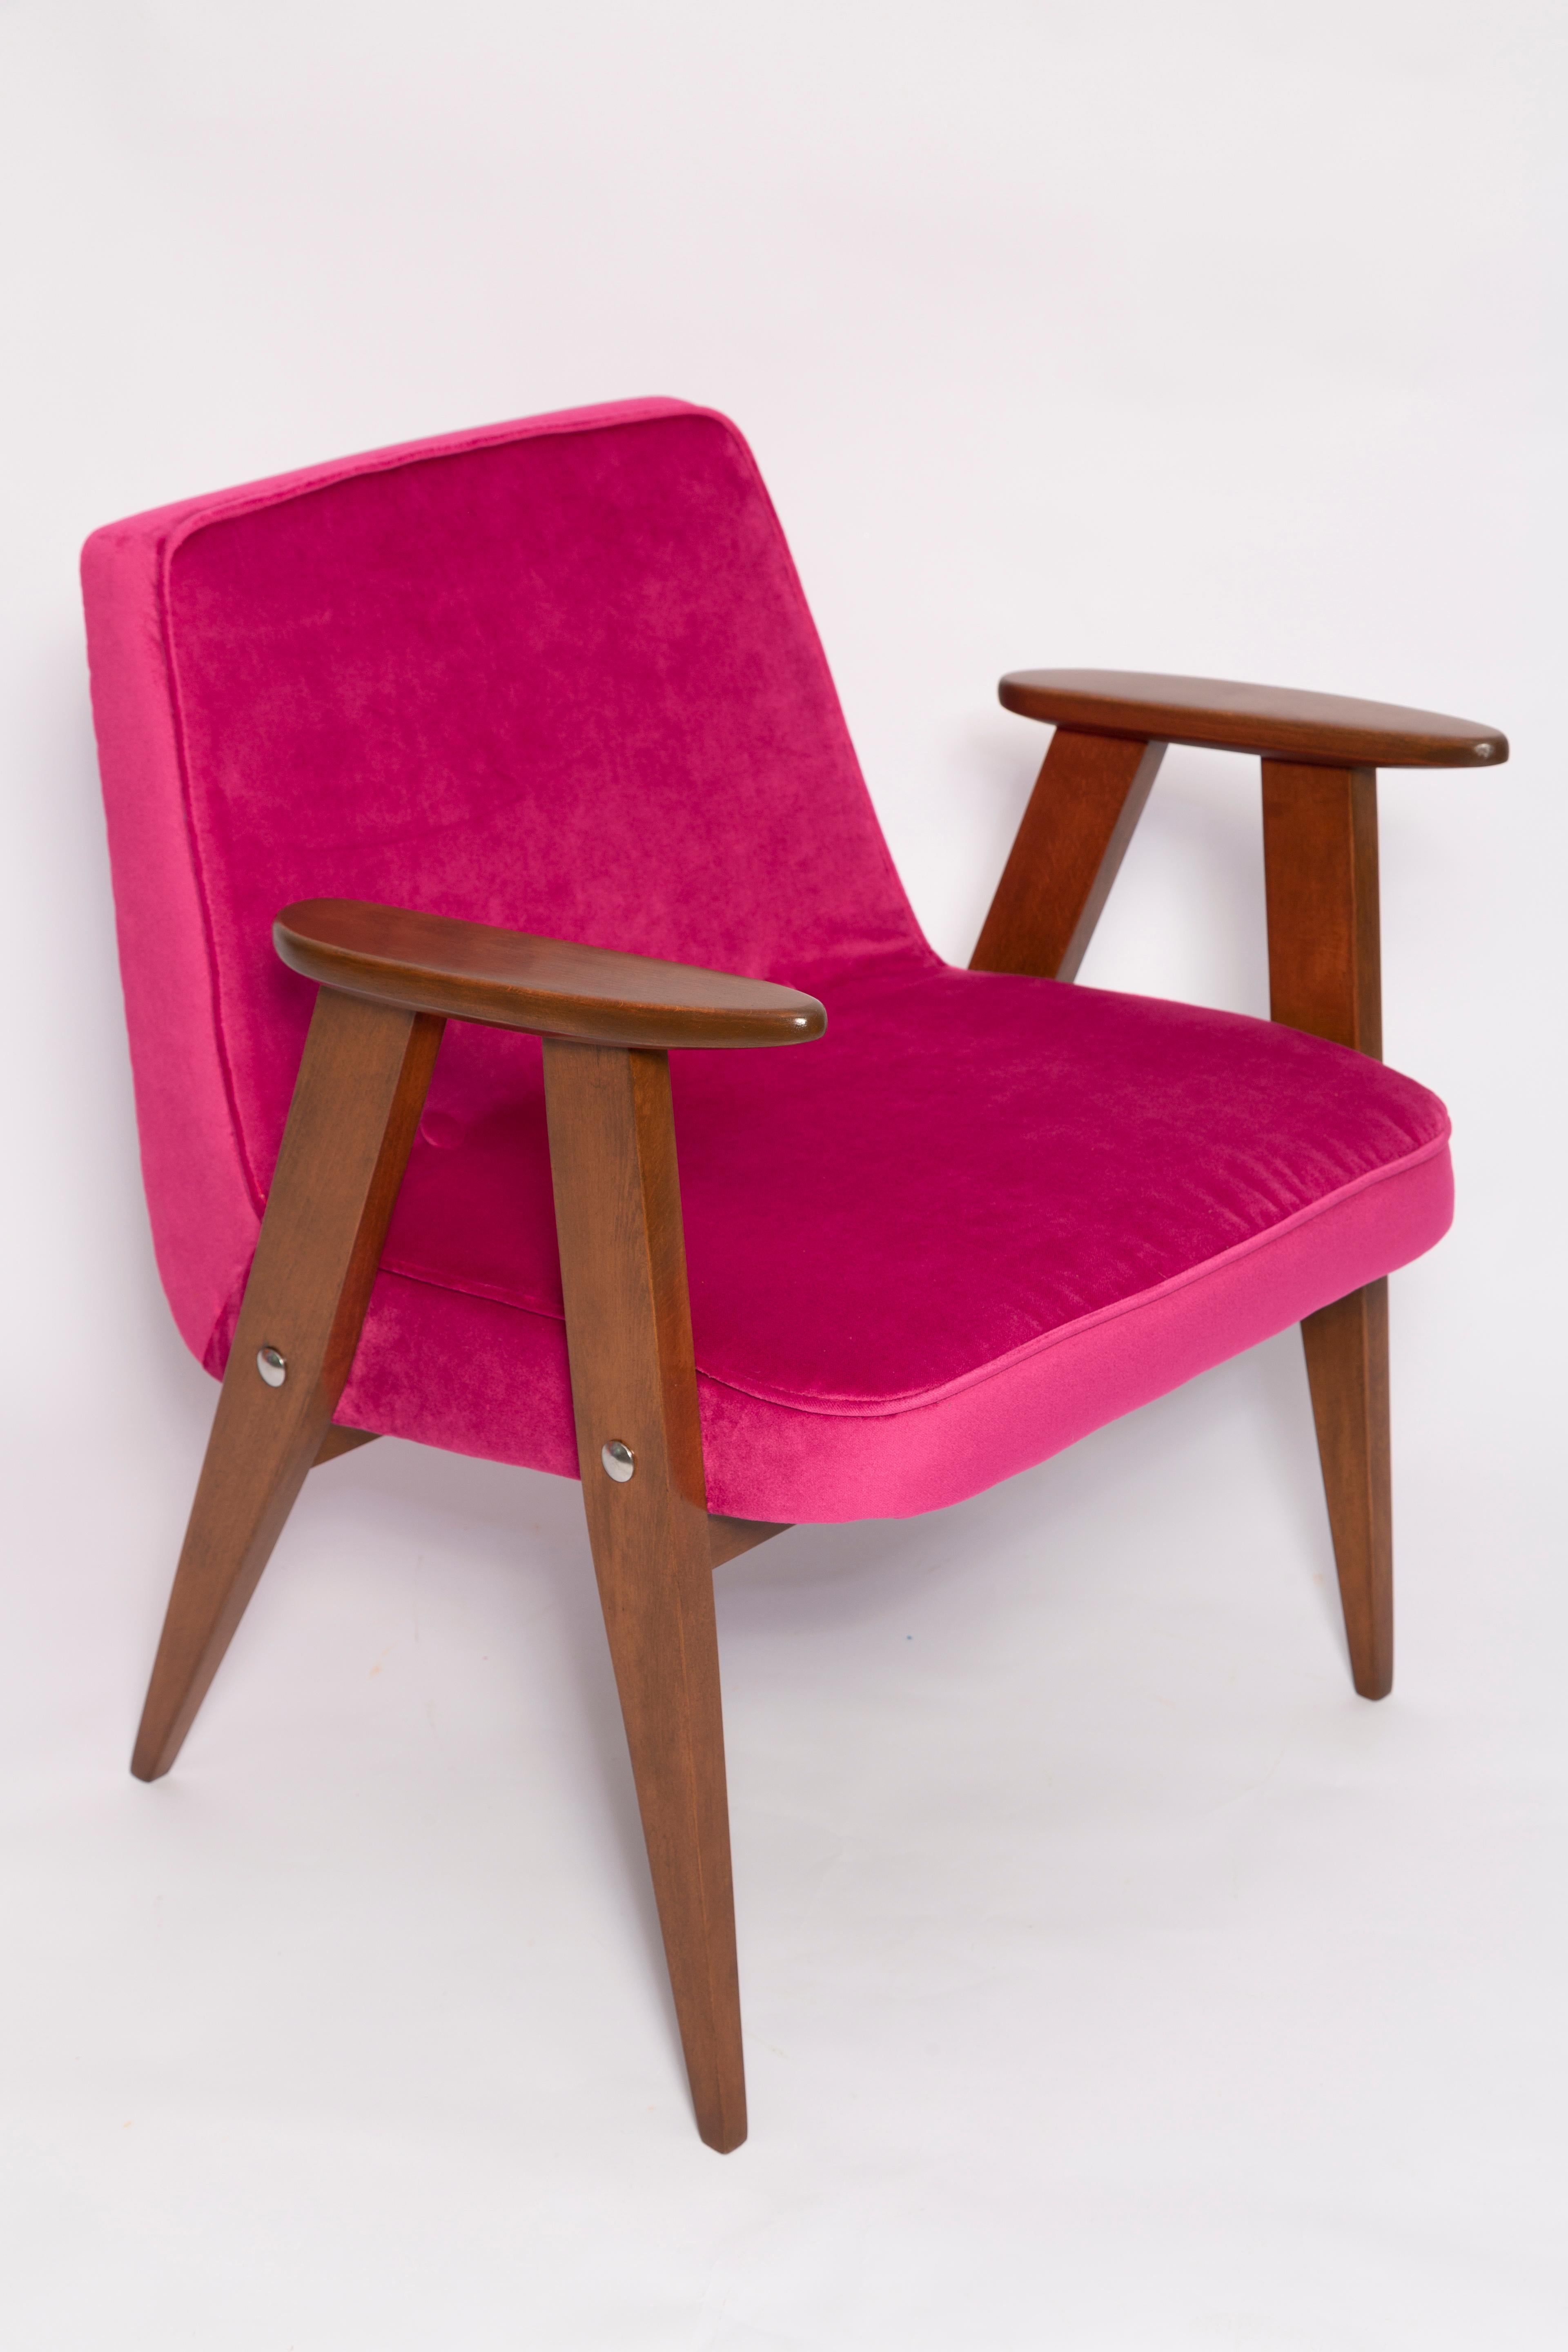 Pair of Mid-Century 366 Armchairs, Pink and Blue, by Chierowski Europe, 1960s For Sale 2